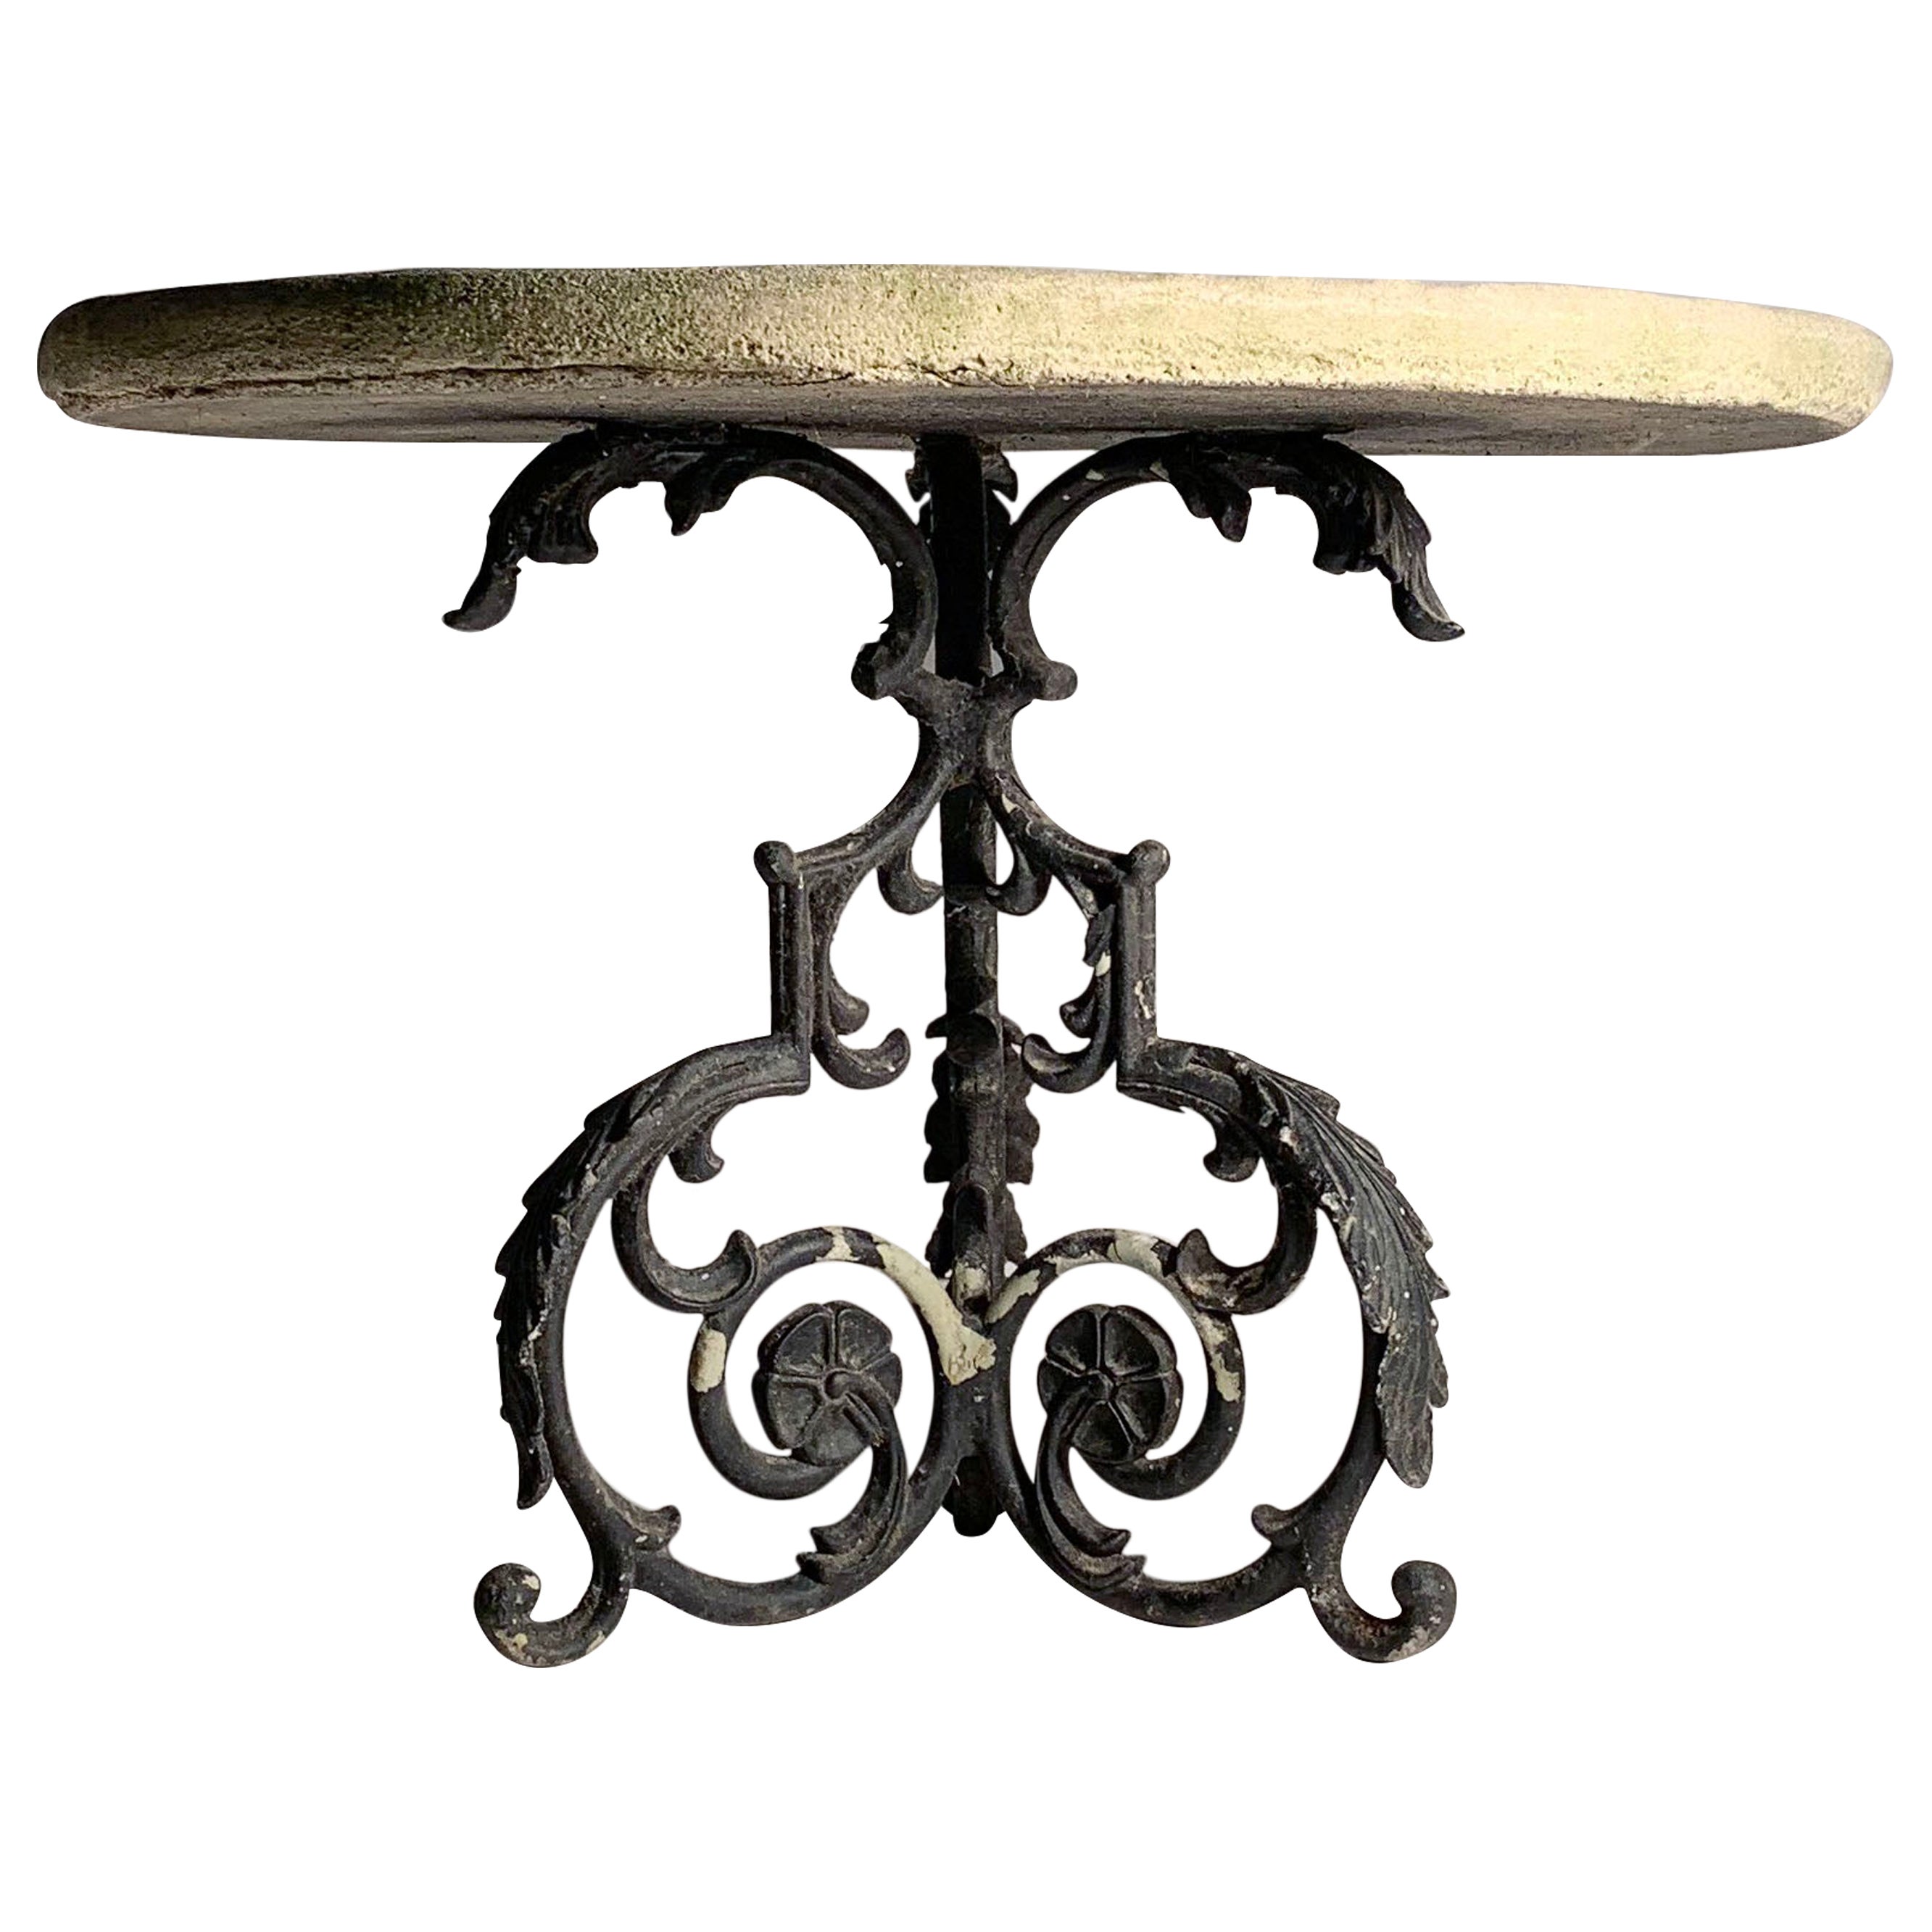 Petite Antique Garden Table with Elaborate Cast Stone Top